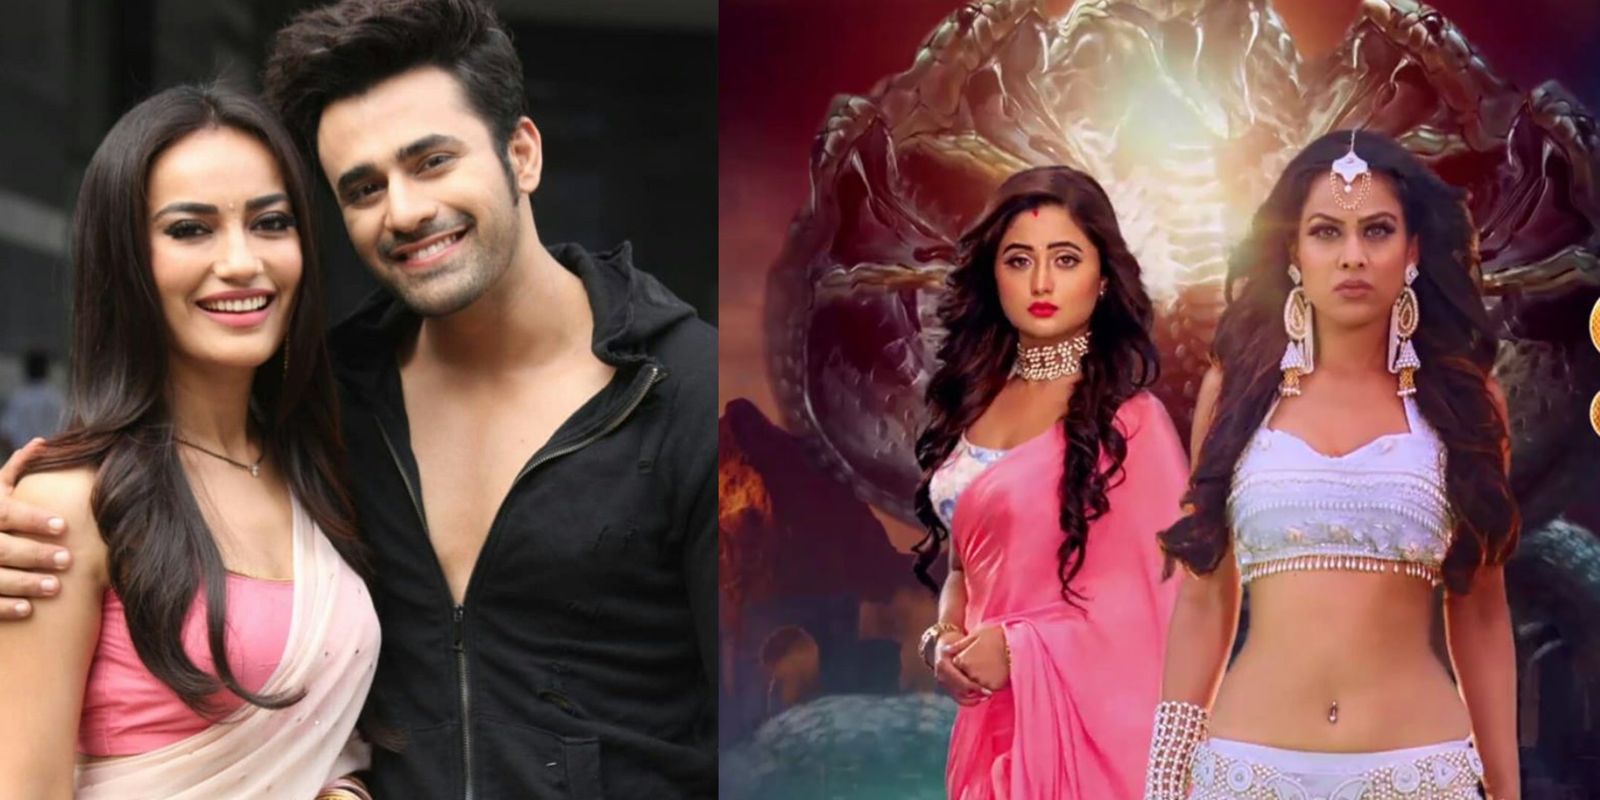 Naagin 4: Surbhi Jyoti And Pearl V. Puri To Make An Entry Into The Season Finale?